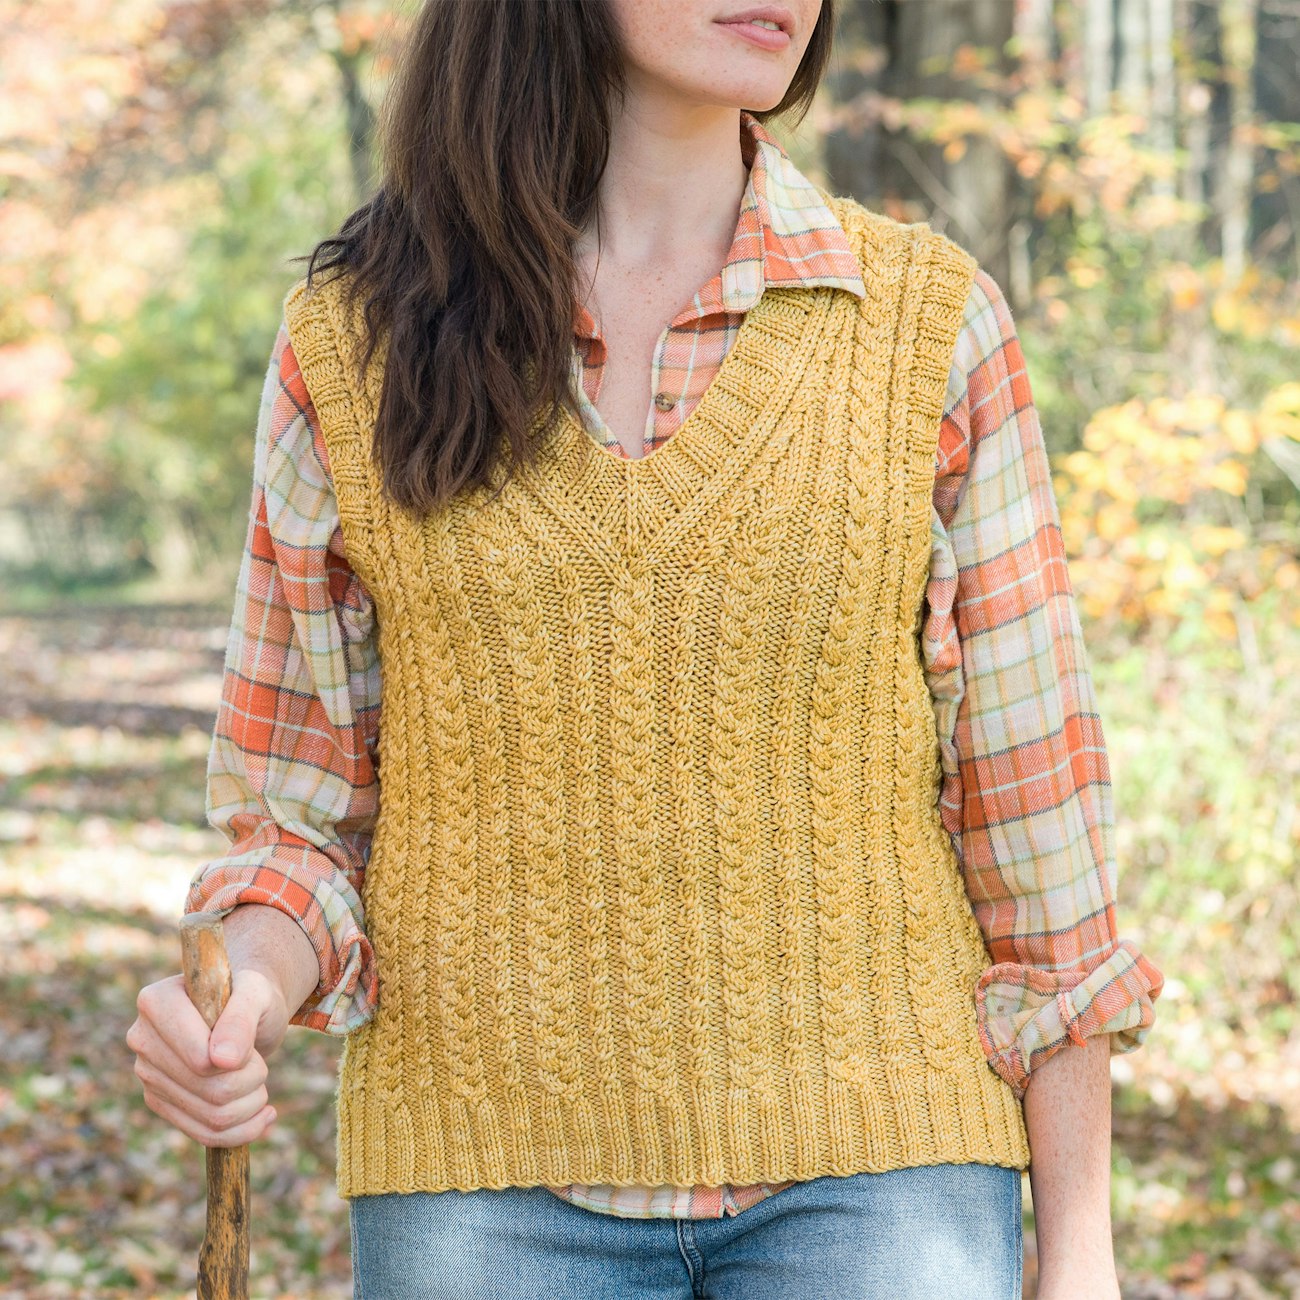 Woman with long brown hair, gold cabled knitted vest, plaid shirt, and jeans carries walking stick in woods